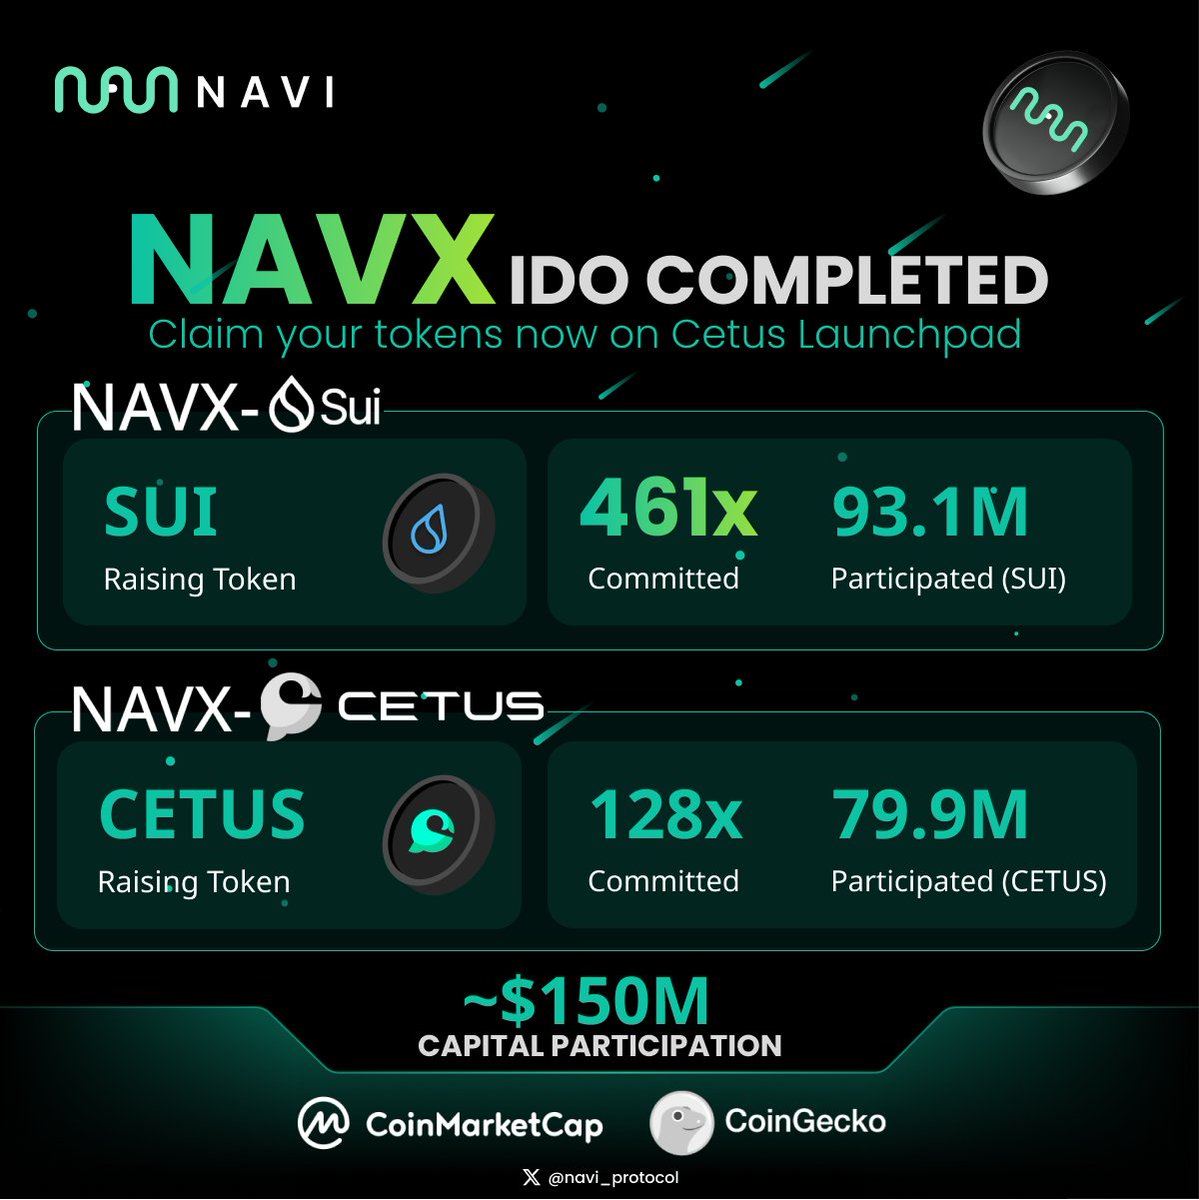 📢The $NAVX IDO has officially closed, concluding the 3-day journey on @CetusProtocol Launchpad. With an extraordinary oversubscription performance, here are the final numbers: ✅ NAVX/SUI LaunchPool - 461x commit, 93,118,128 SUI participated ✅ NAVX/CETUS LaunchPool - 128x…